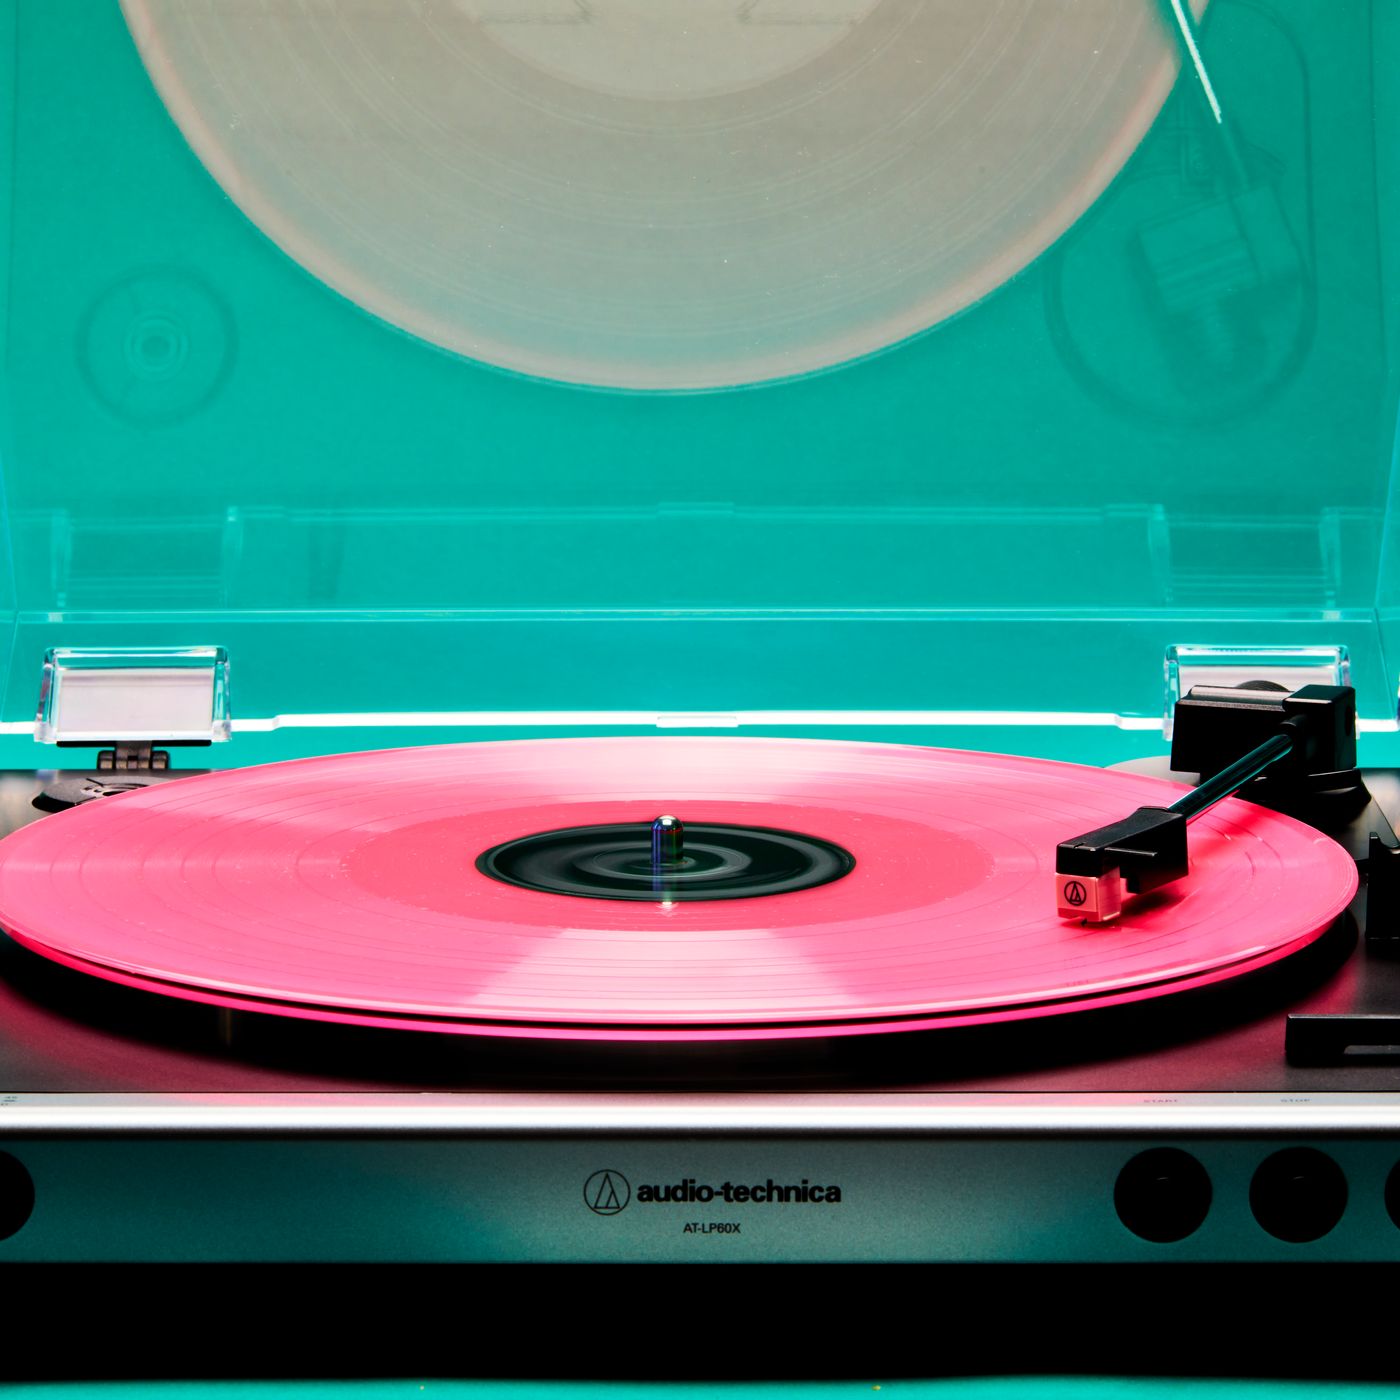 7 Pointers to Consider When Buying a Vinyl Record Player